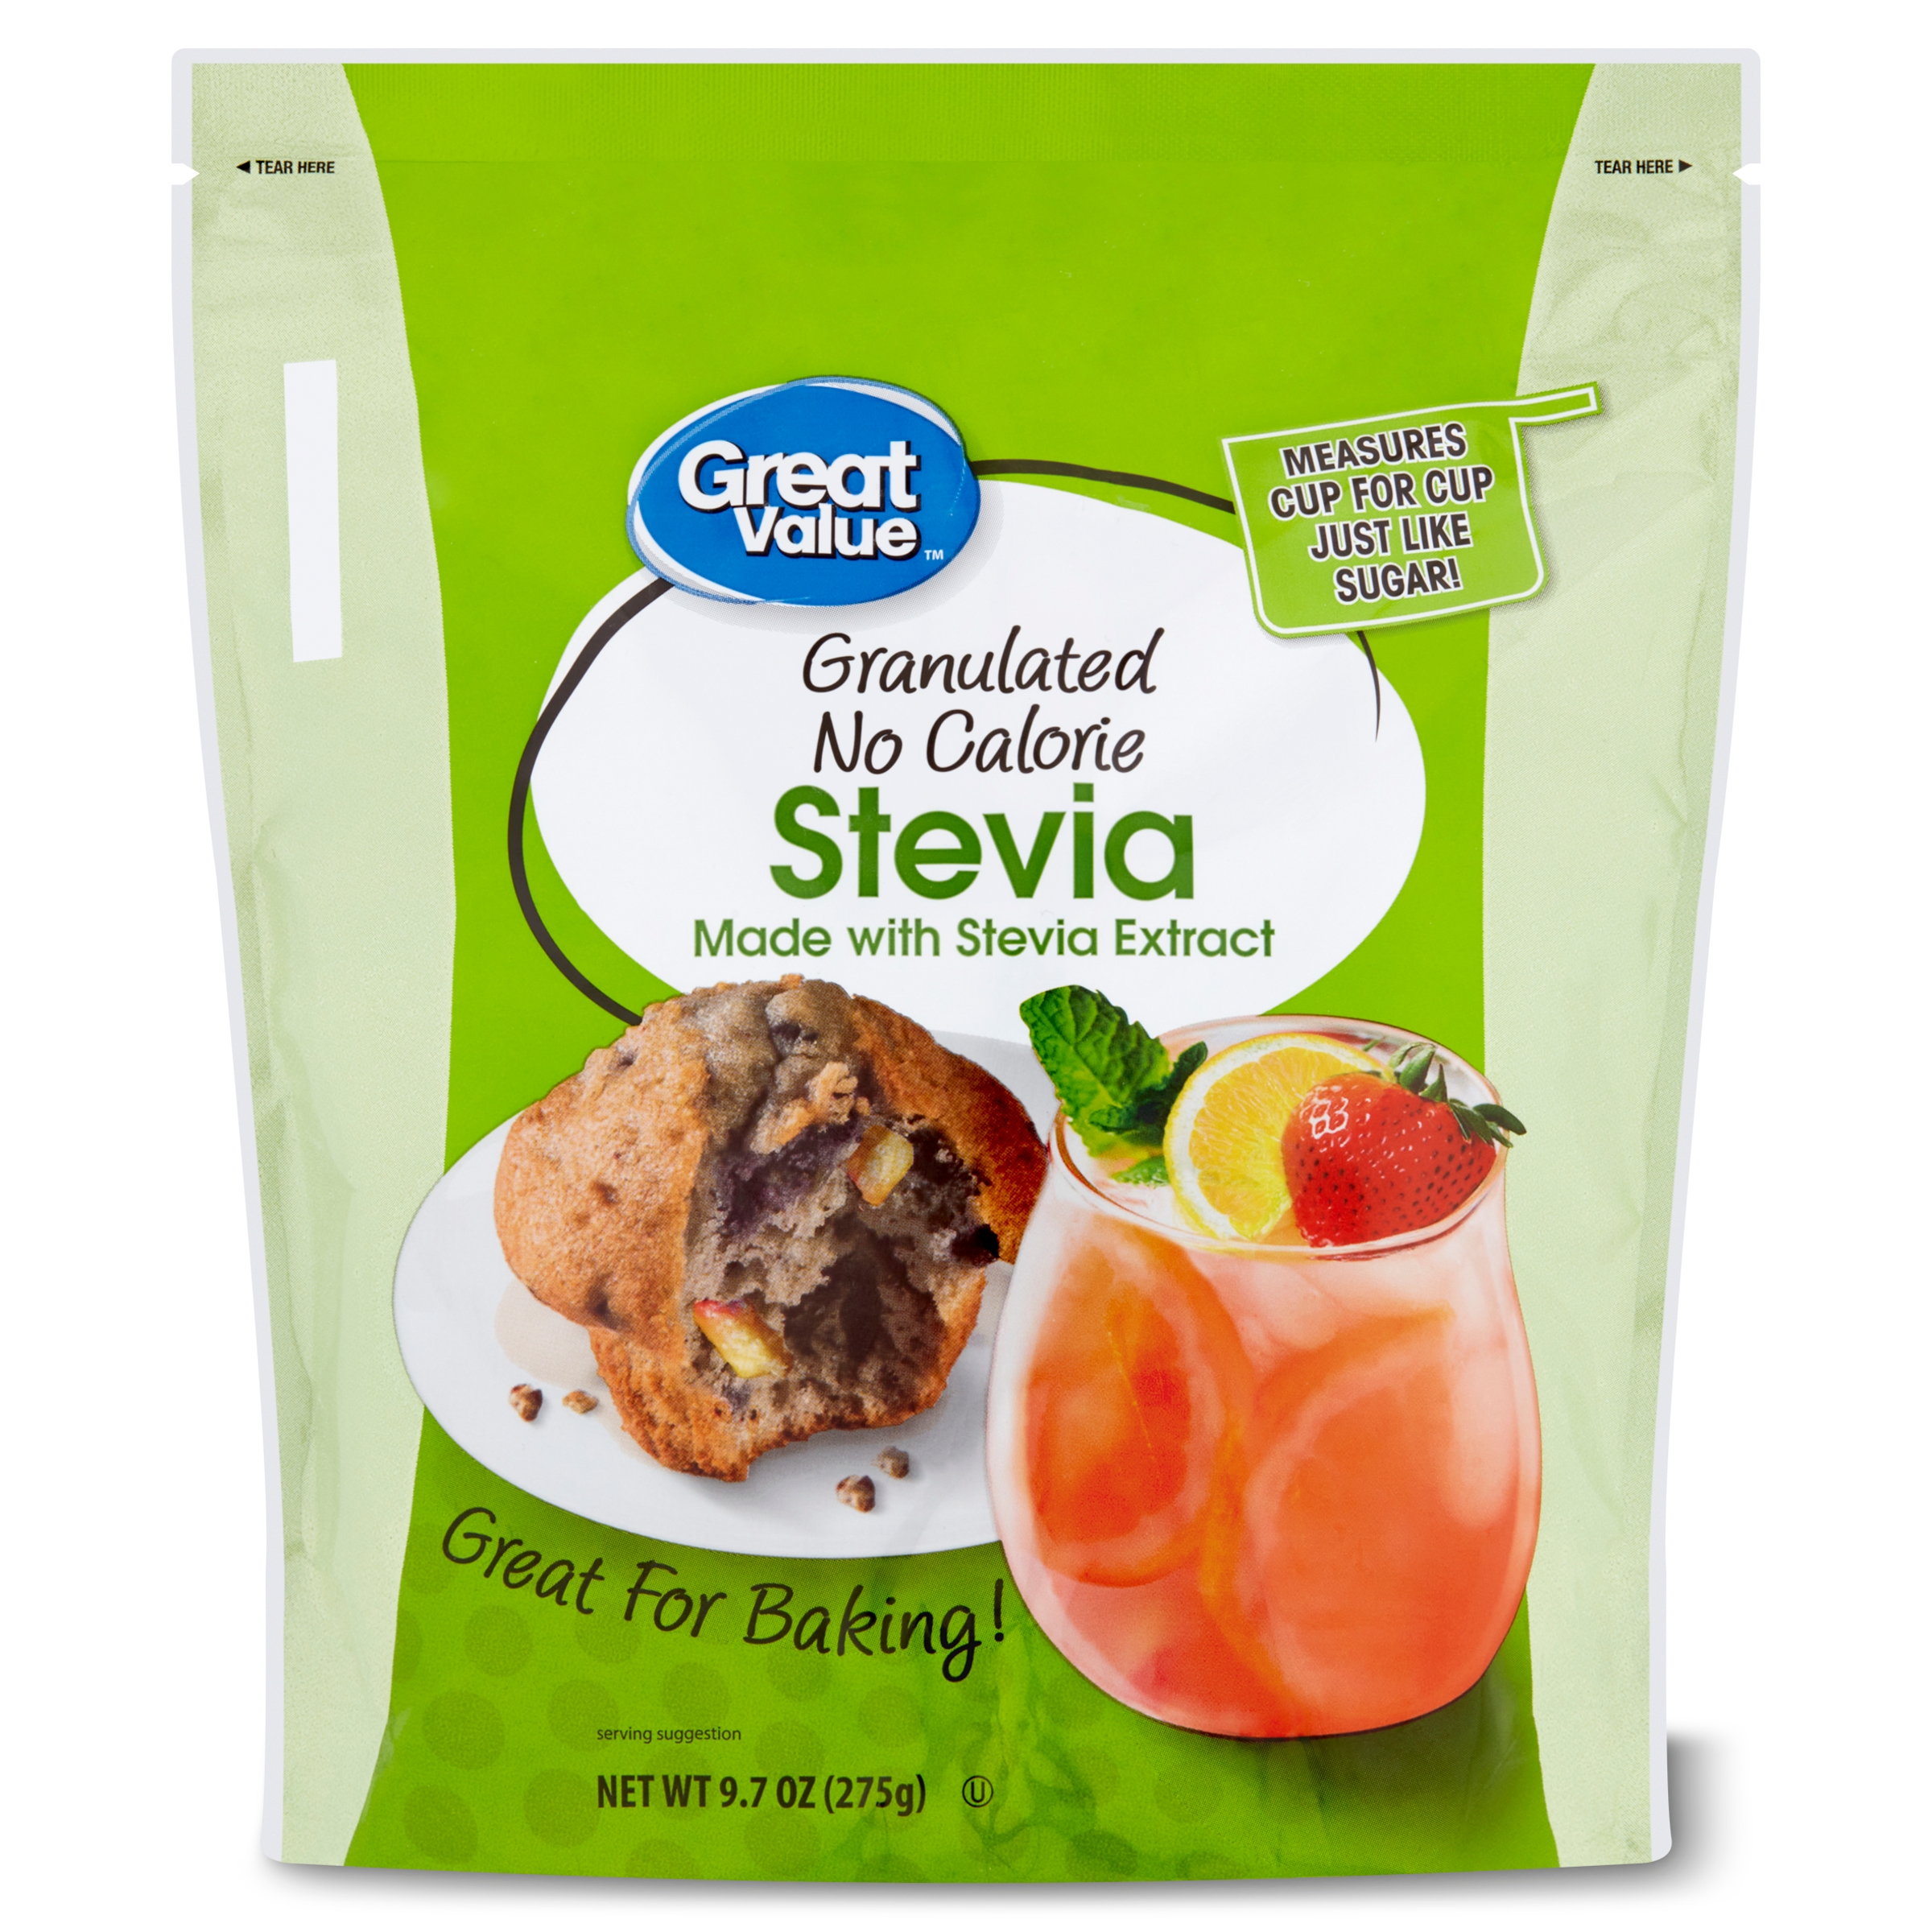 Great Value Granulated Stevia Sweetener, No Calorie, 9.7 oz - image 1 of 8